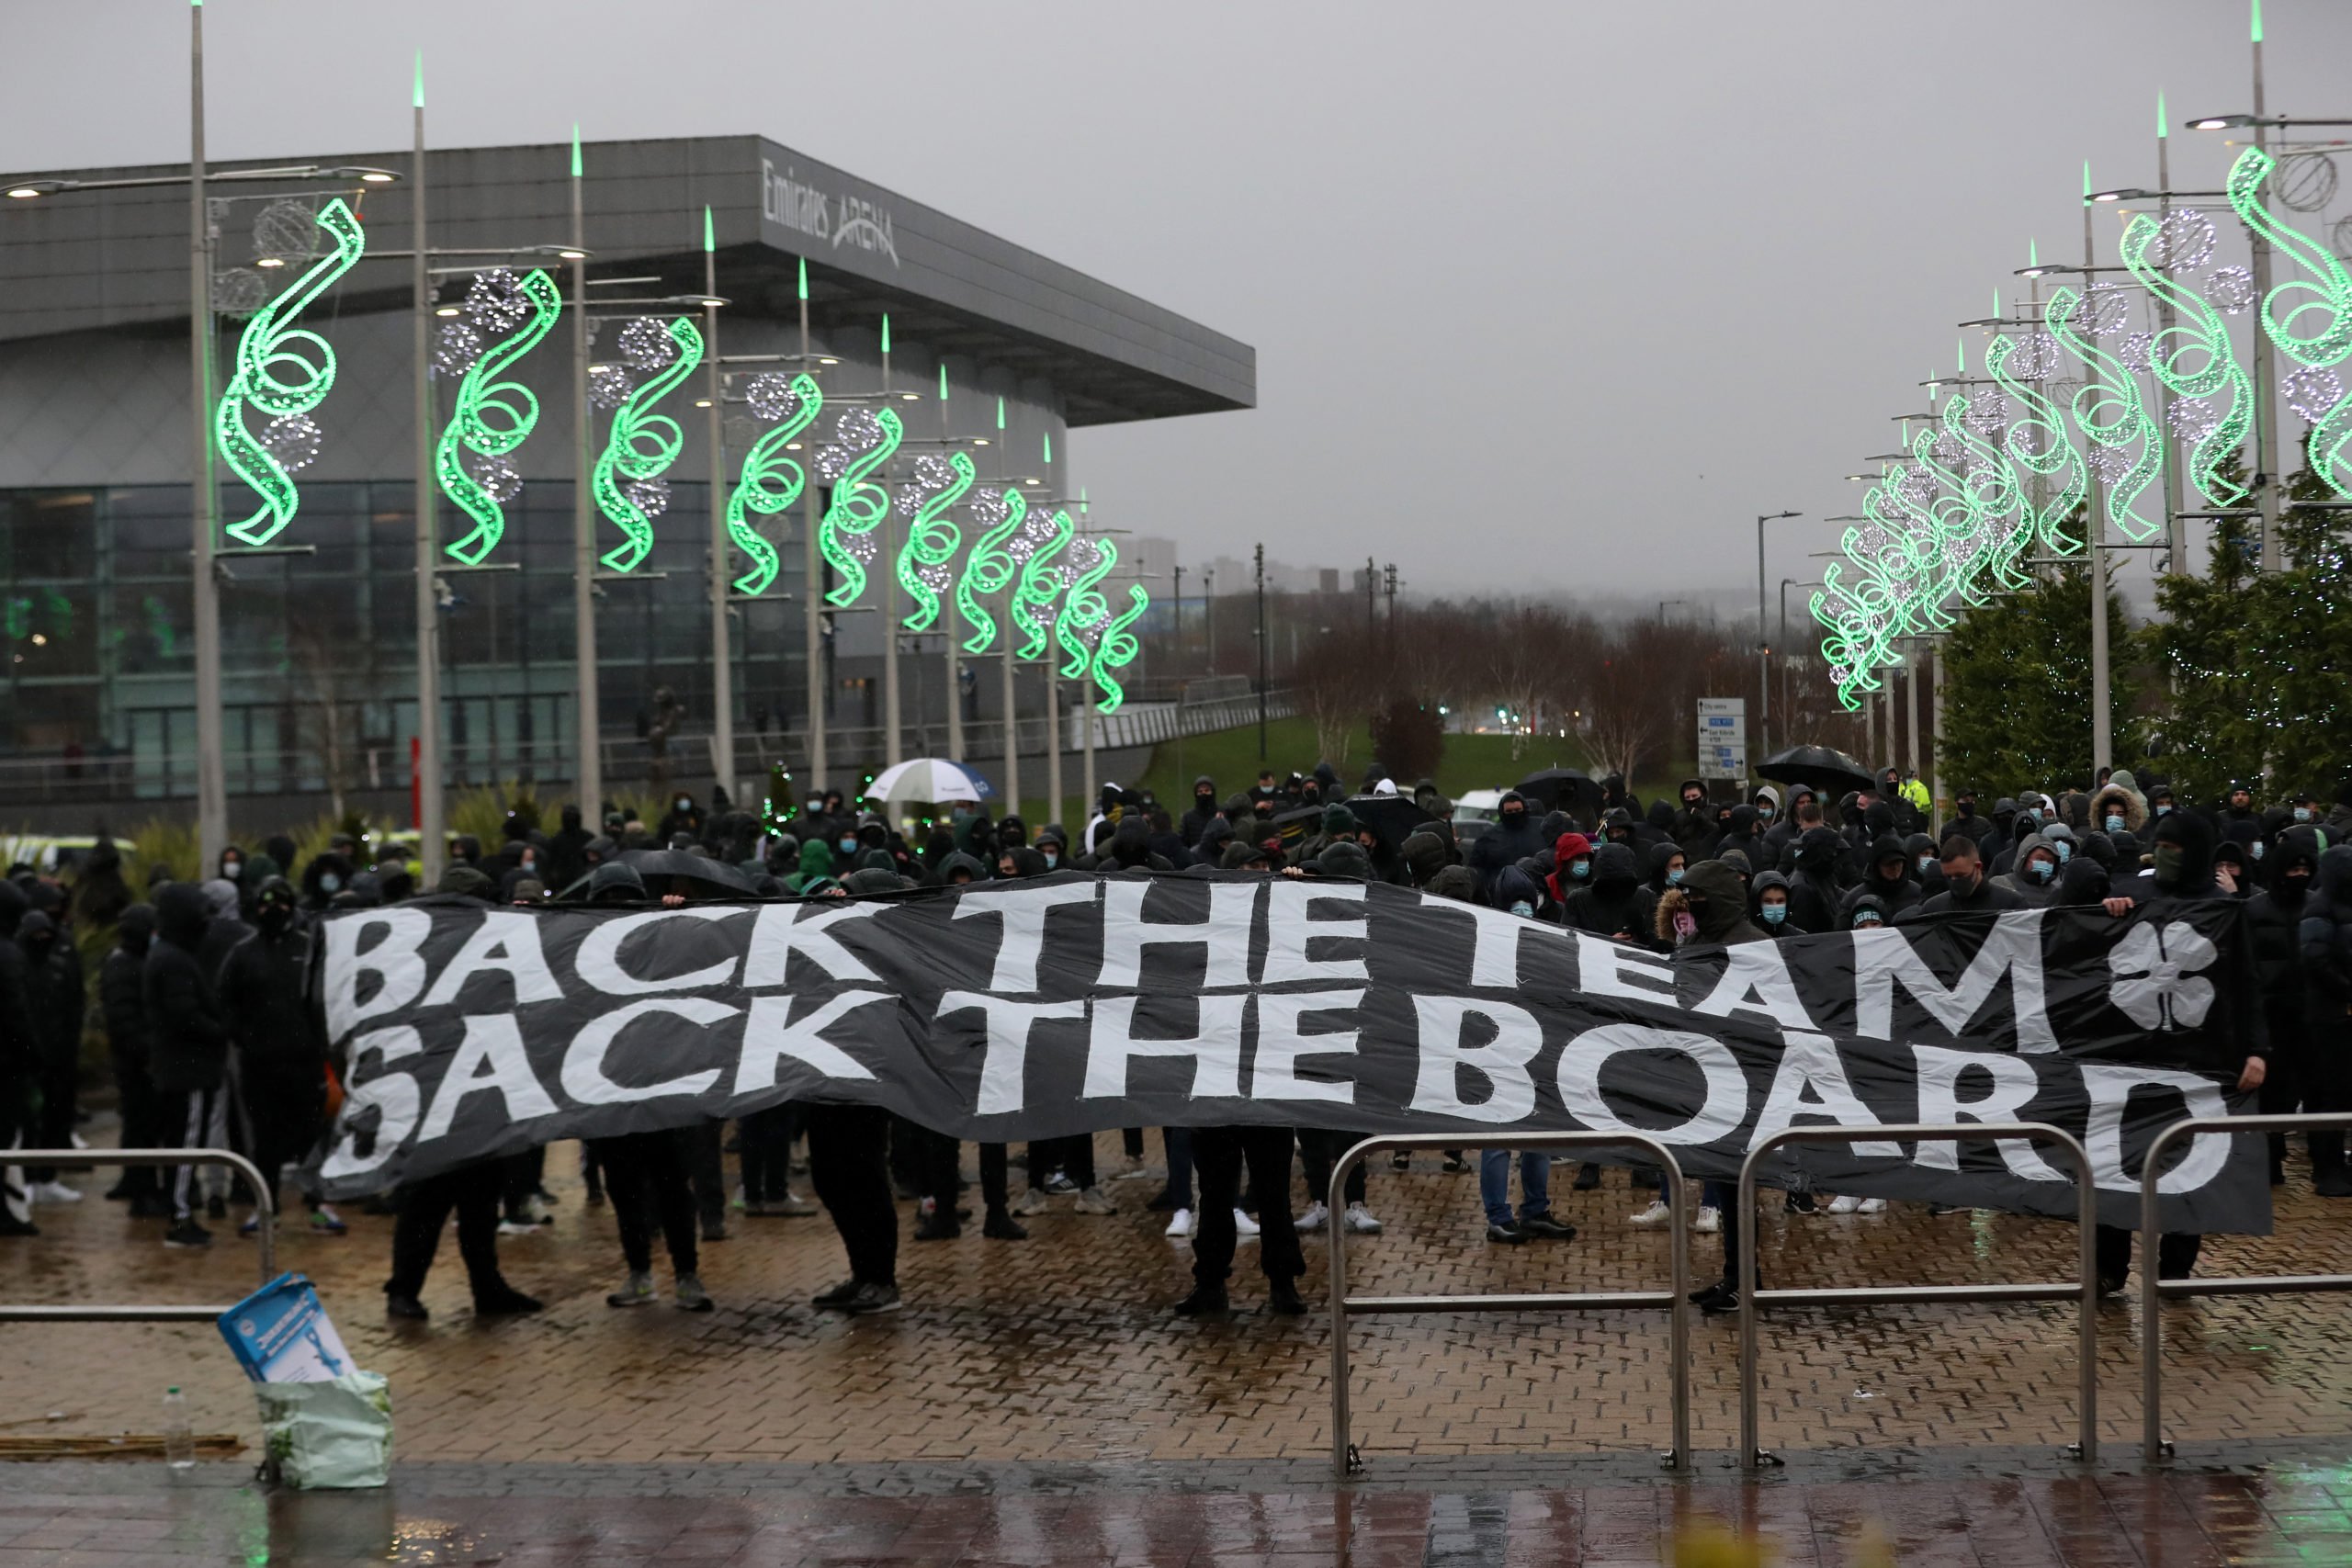 Celtic Shared emphasise the need for Sunday demonstration